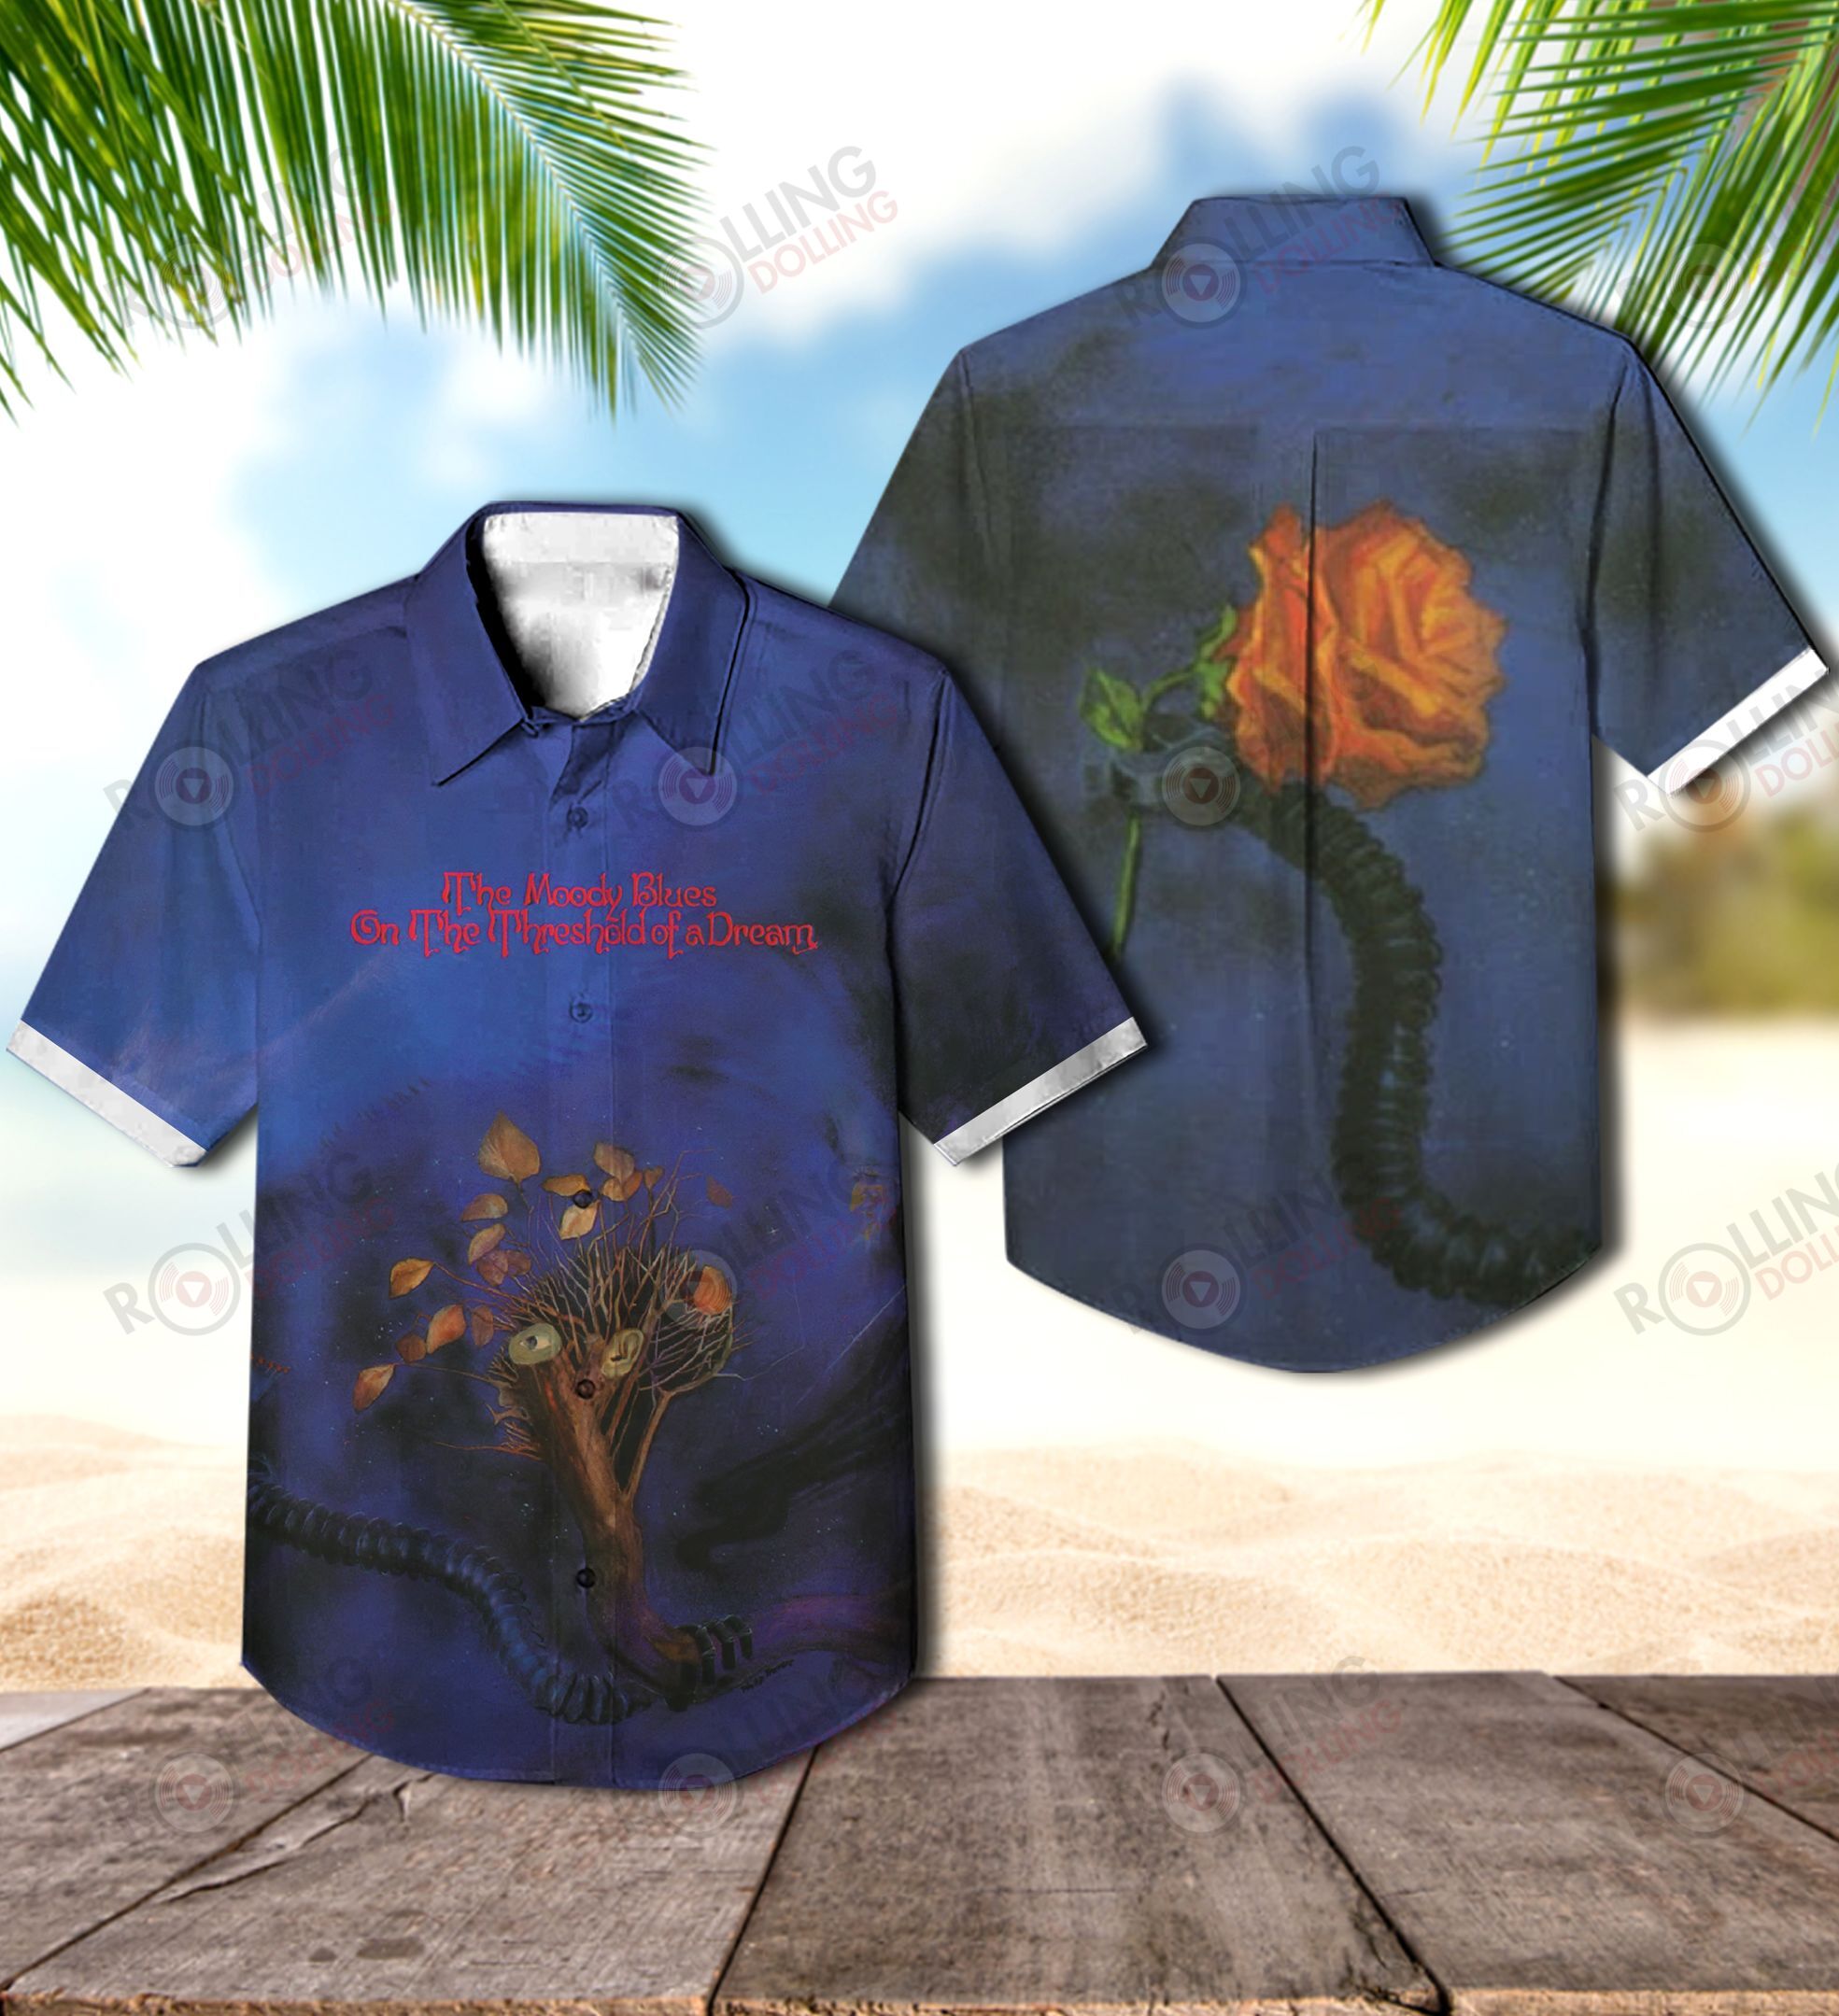 Check out these top 100+ Hawaiian shirt so cool for rock fans 343